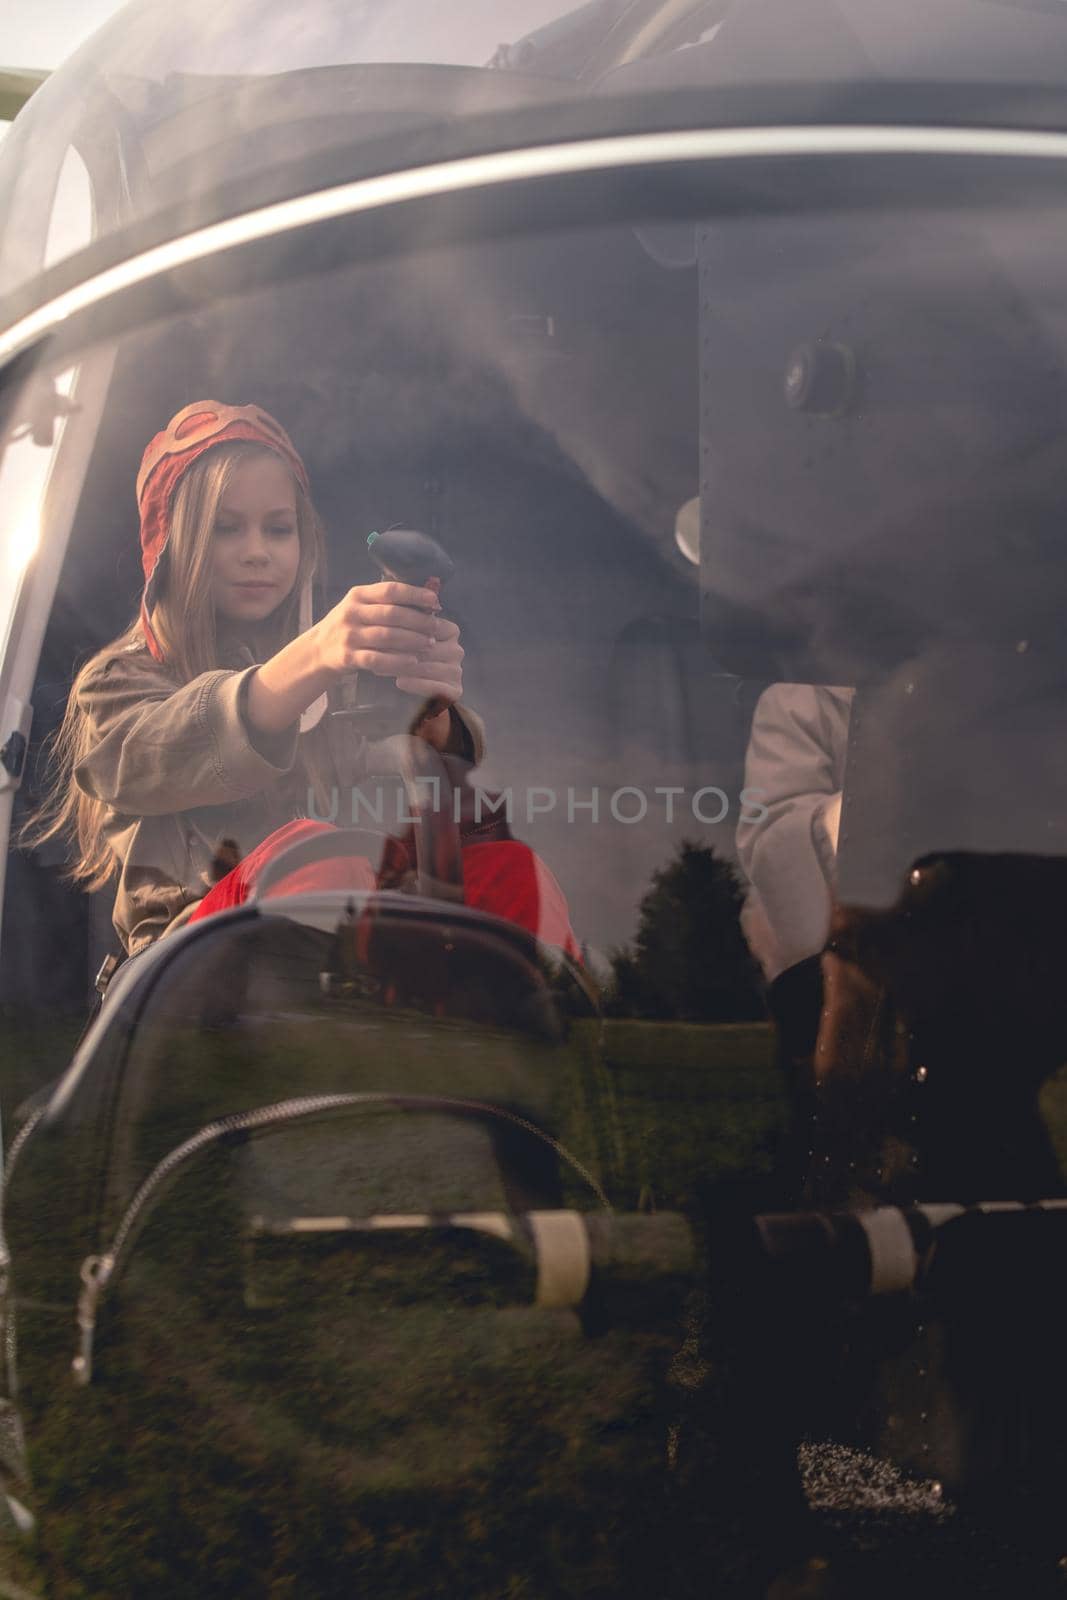 View through glass of helicopter cockpit of focused preteen girl sitting on co-pilot seat imitating aircraft control. Childhood dream of becoming aviator